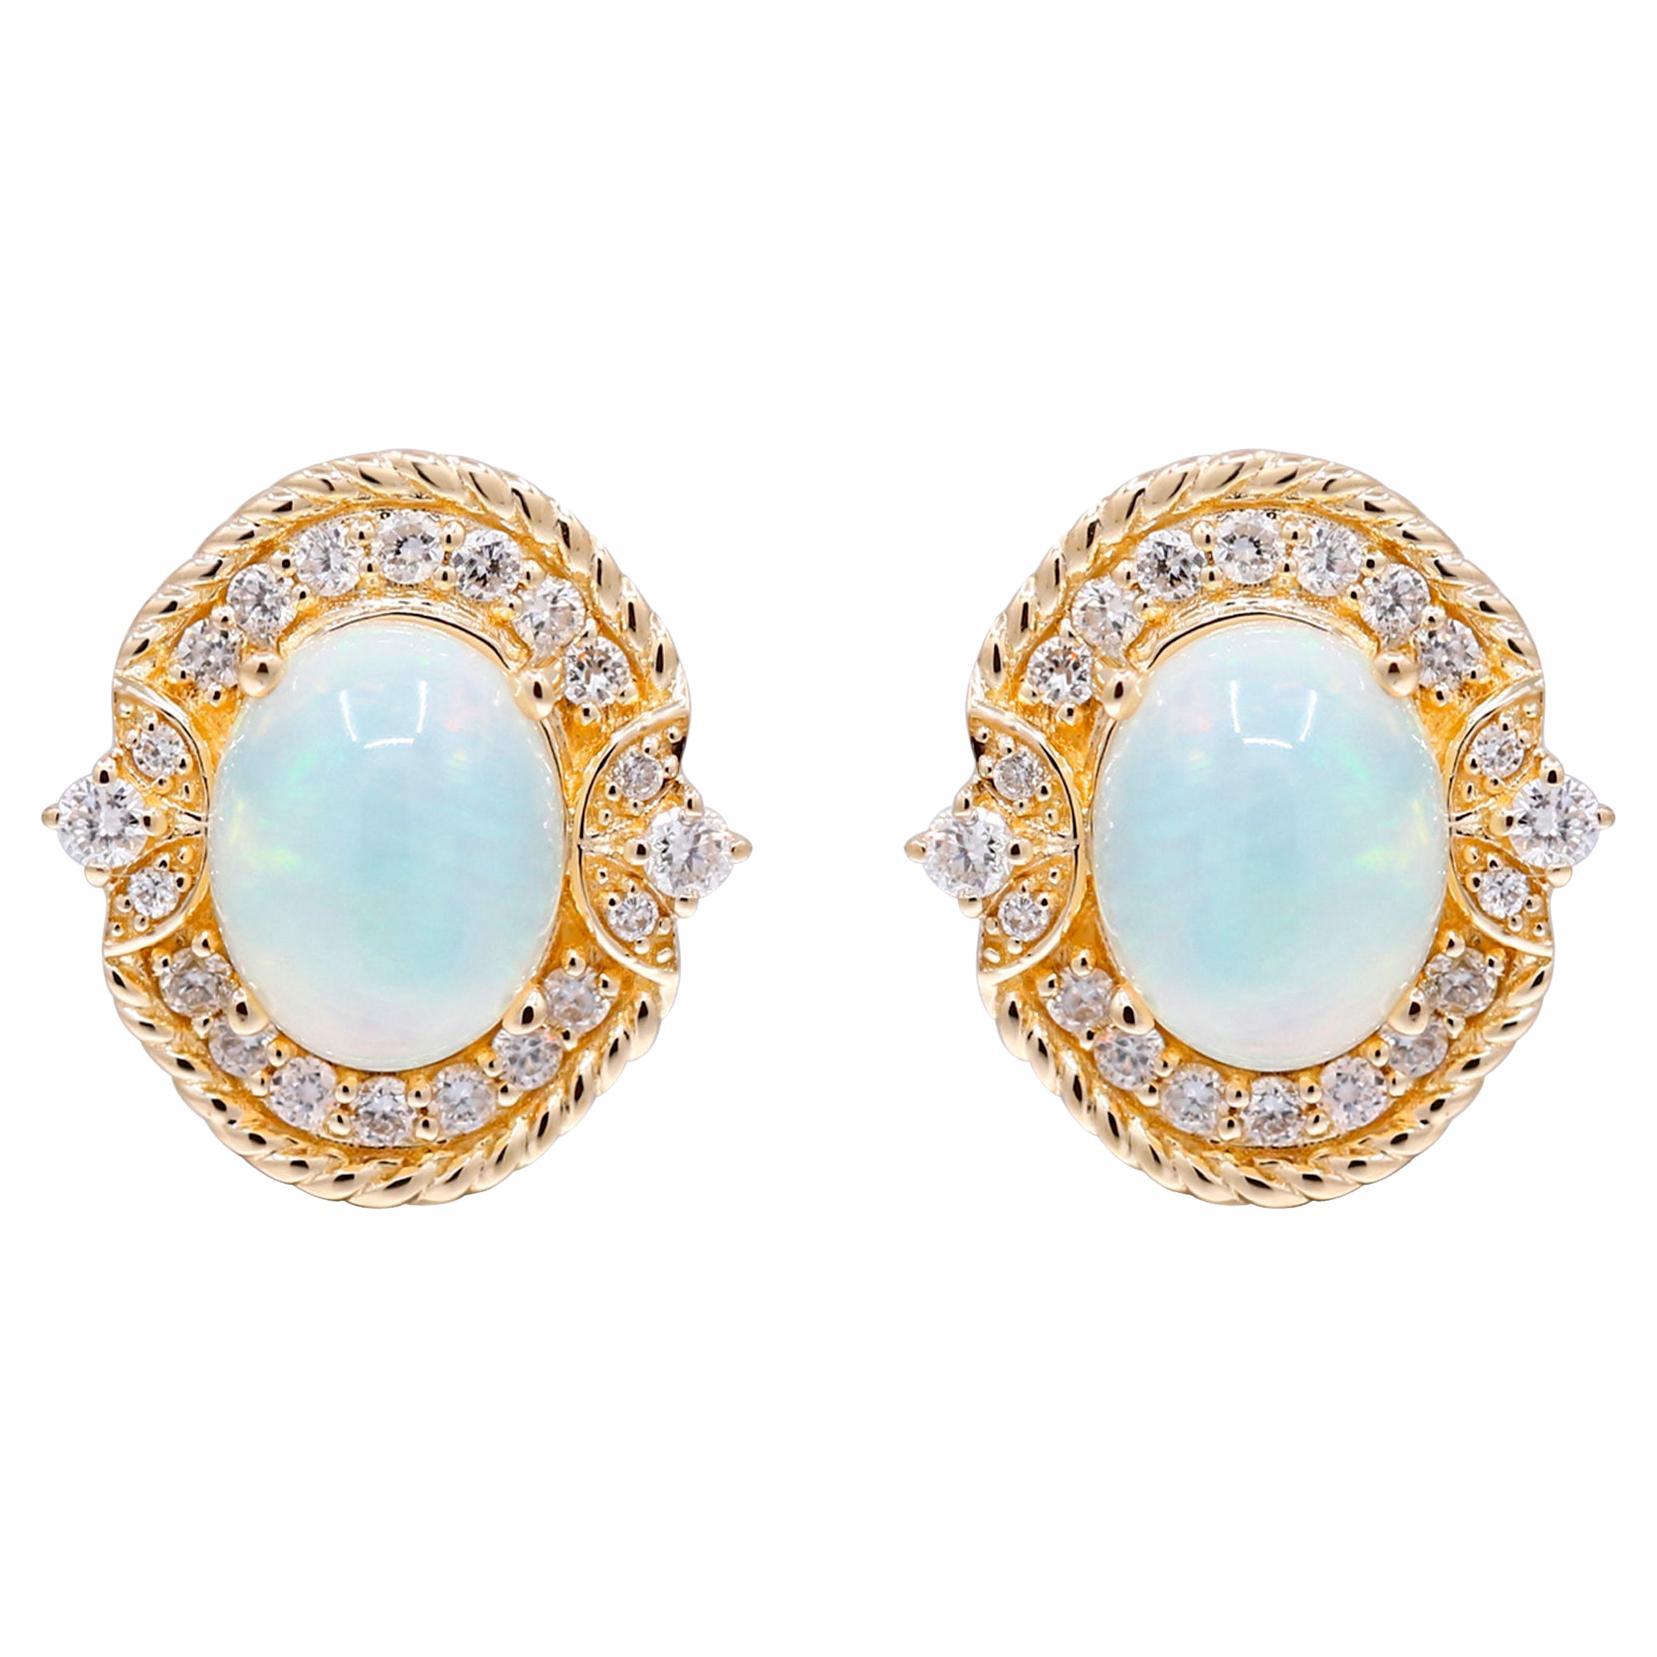 2.37 Carat Ethiopian Opal with Diamond Accents 10K Yellow Gold Earring